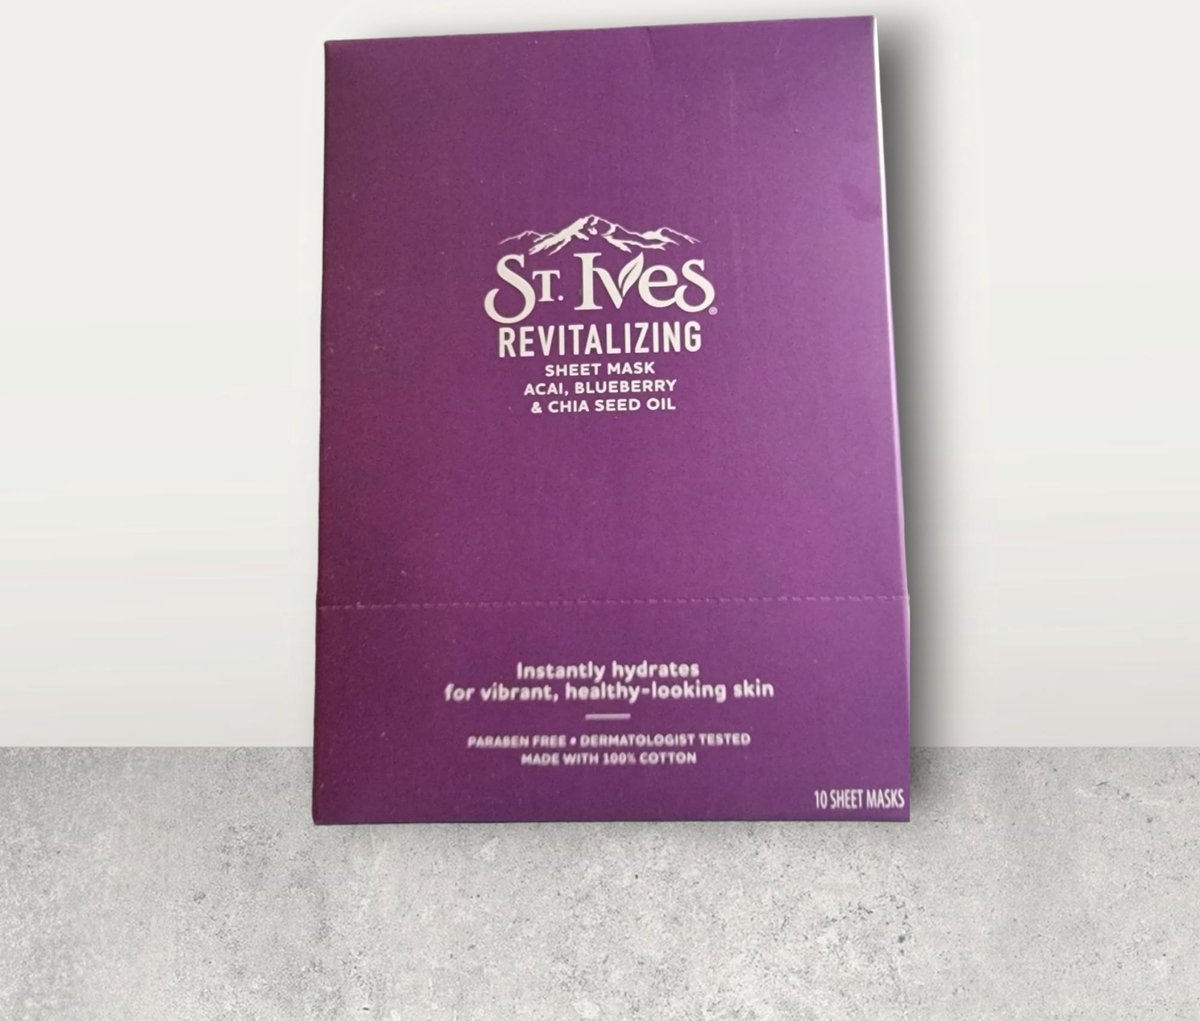 St. Ives - Revitalizing Sheet Mask - Acai, Blueberry & Chia Seed Oil